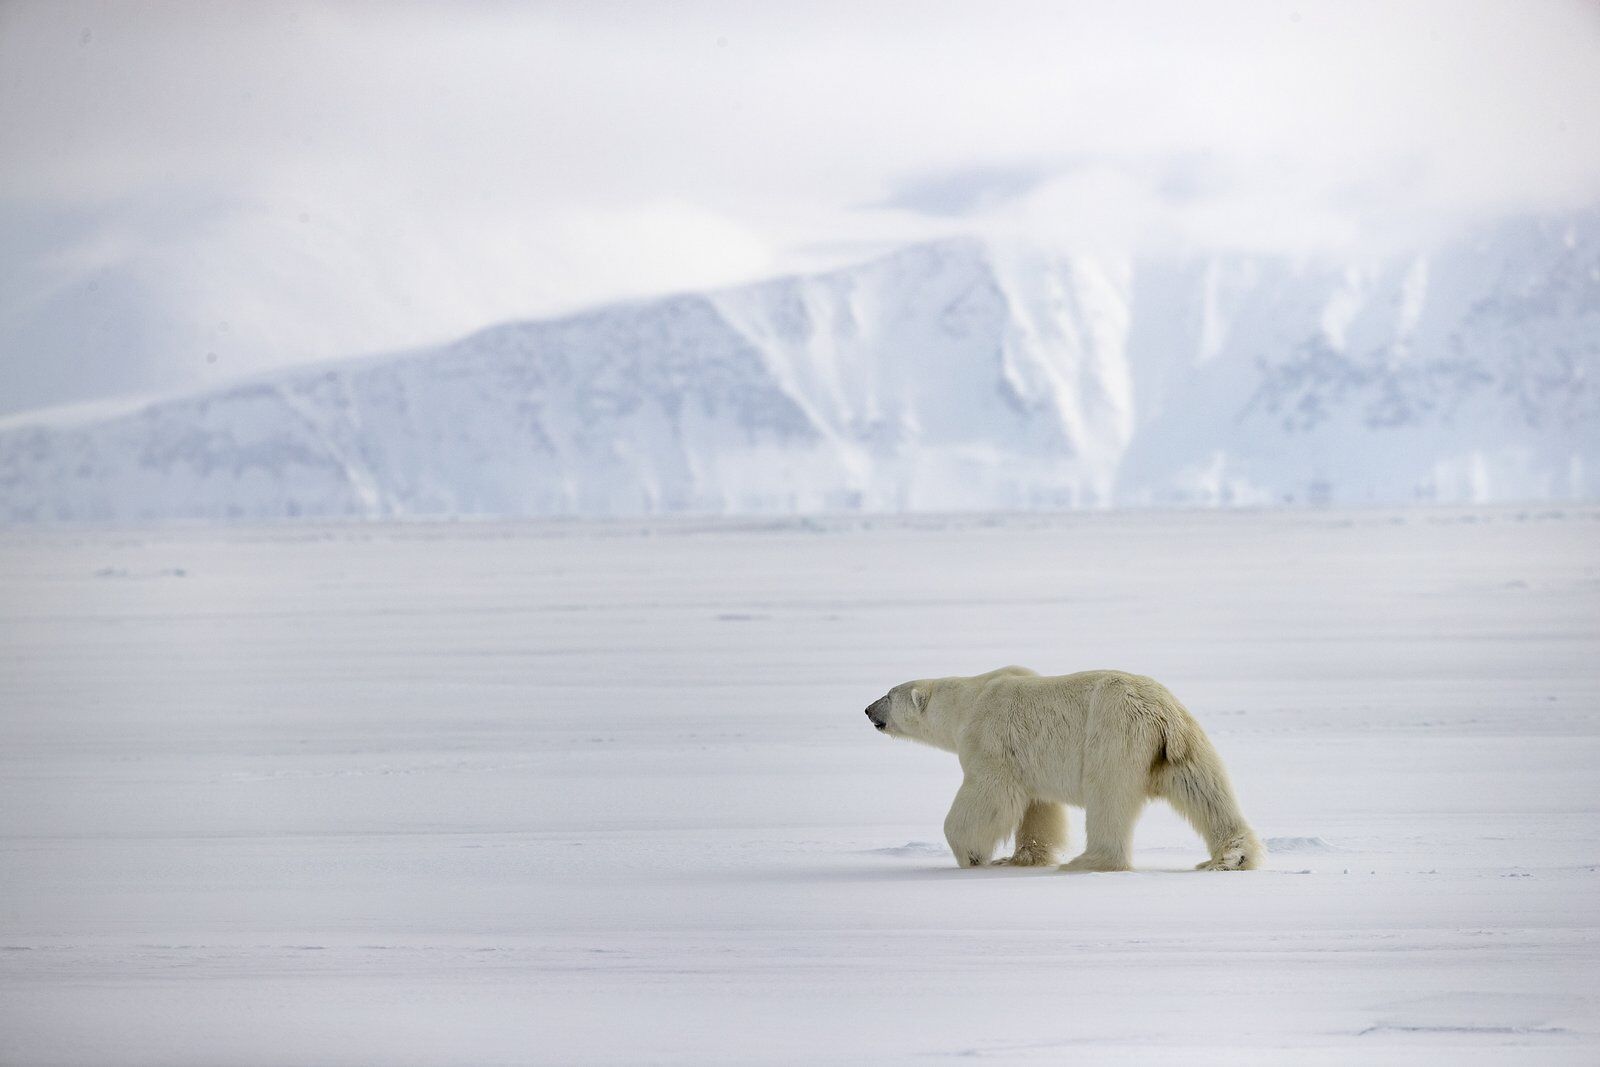 Polar bears in canada are common in Nunavut, as seen here 